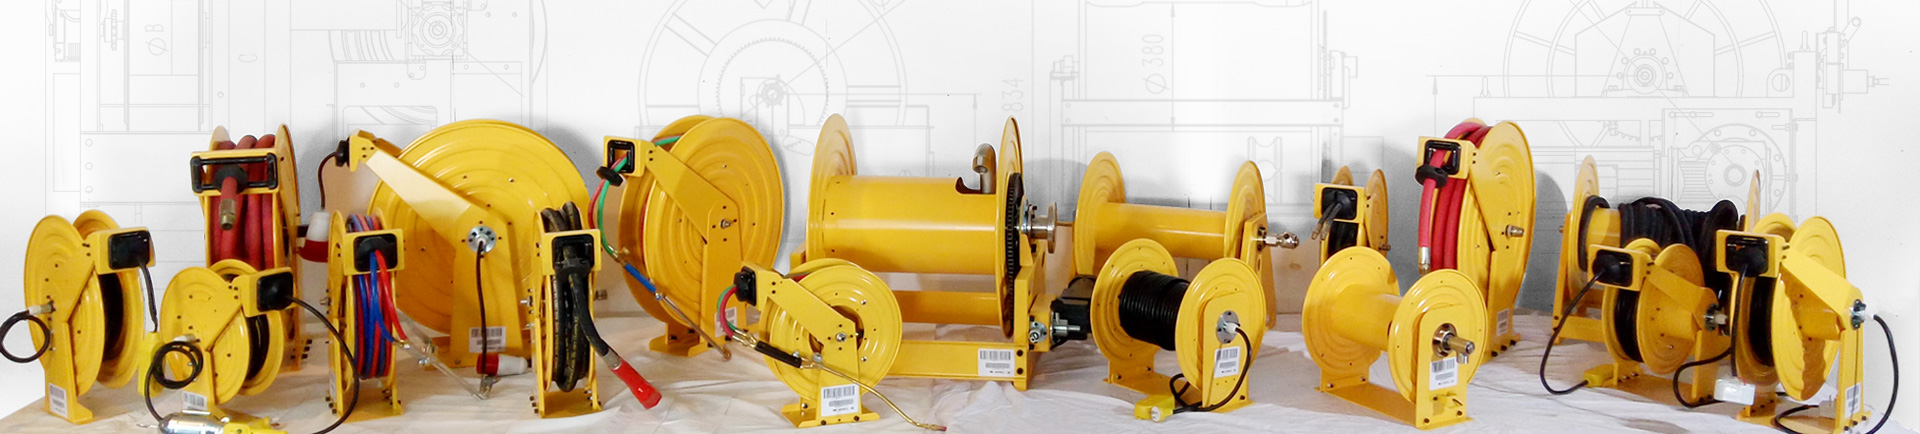 Retractable power cord reel industrial cable reel factory AESC370D